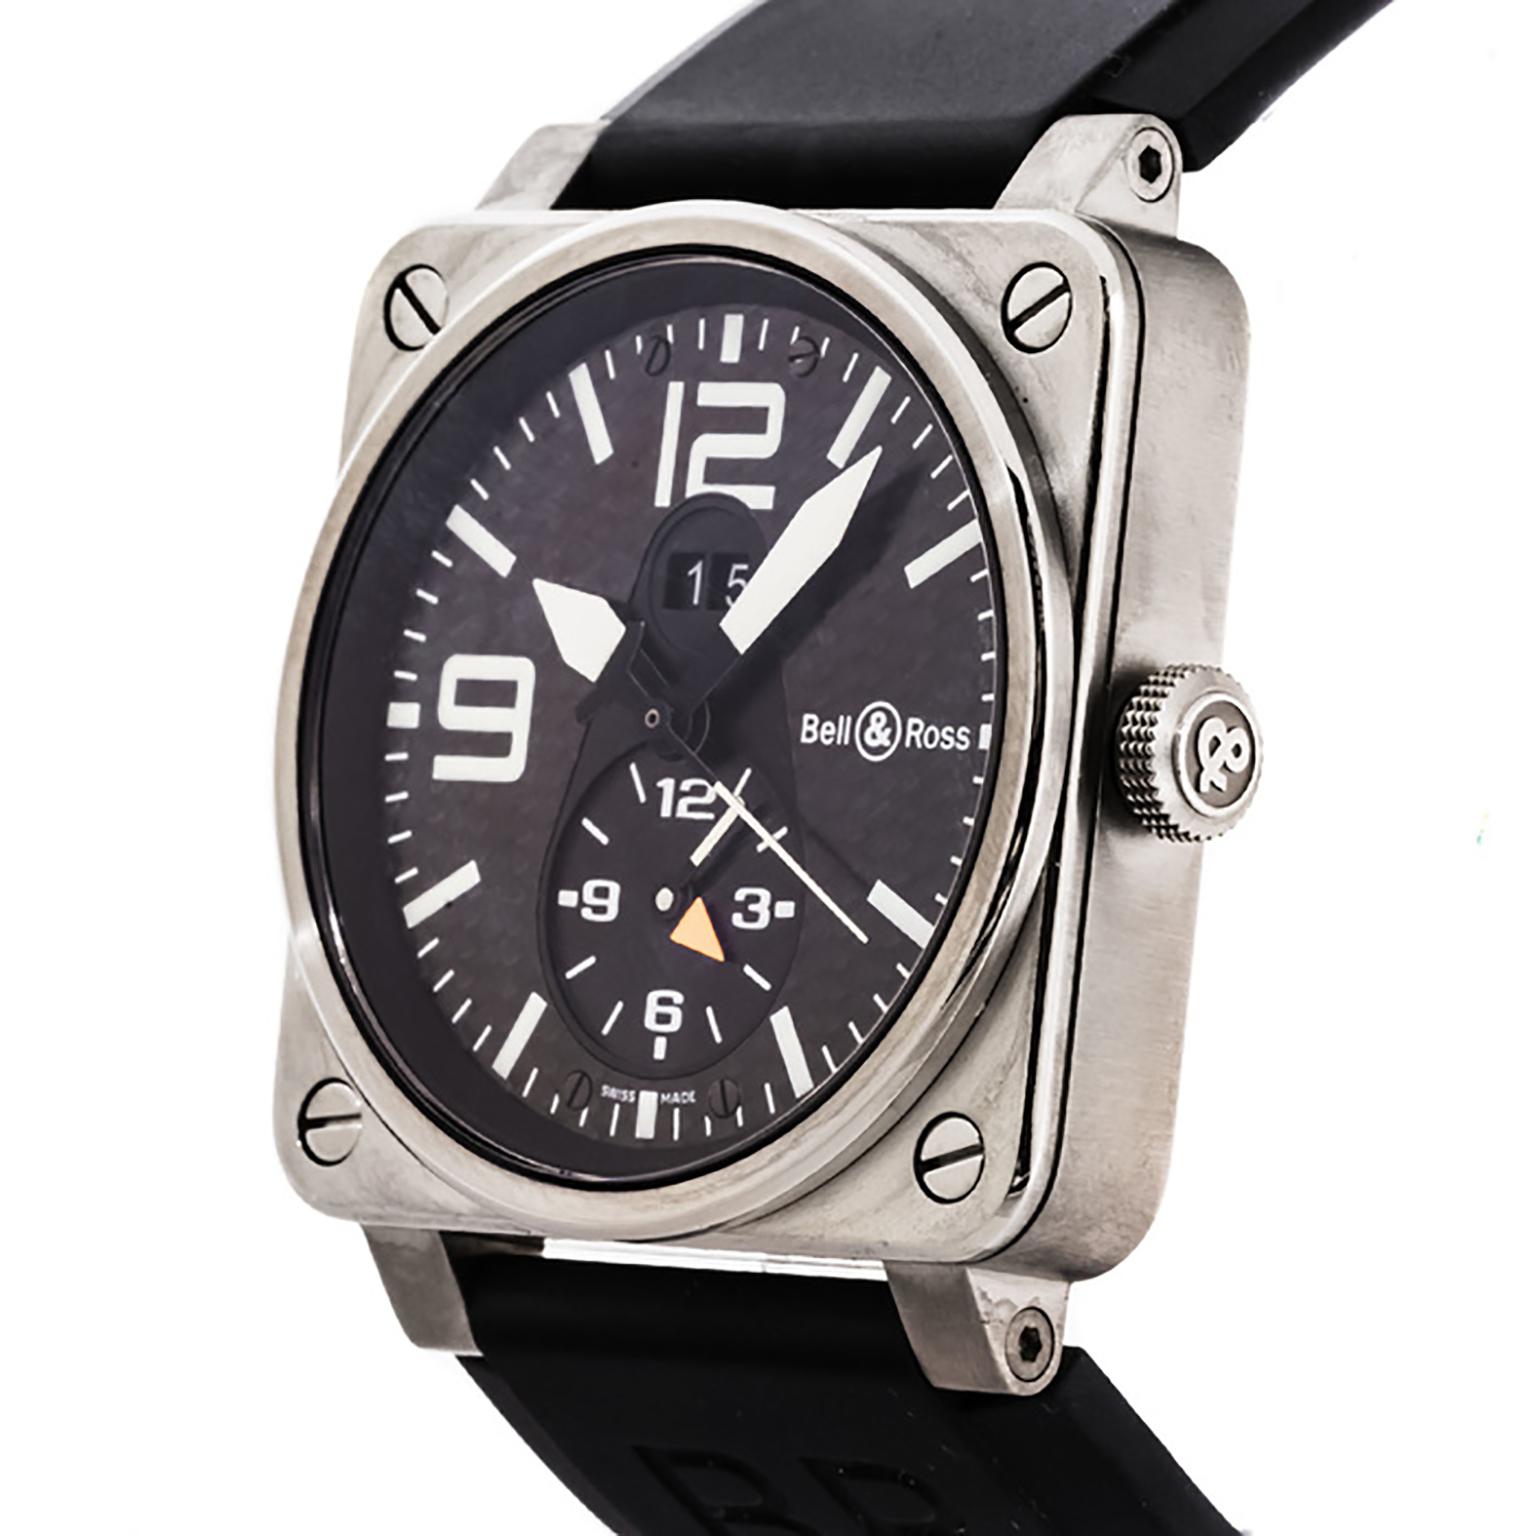 Bell & Ross BR03-51 GMT titanium & stainless steel case with a black rubber strap and stainless steel buckle. Black dial with white hands and white index - tan Arabic numerals hour markers. Movement: Automatic. Dial Type: Analog. Date display at 12